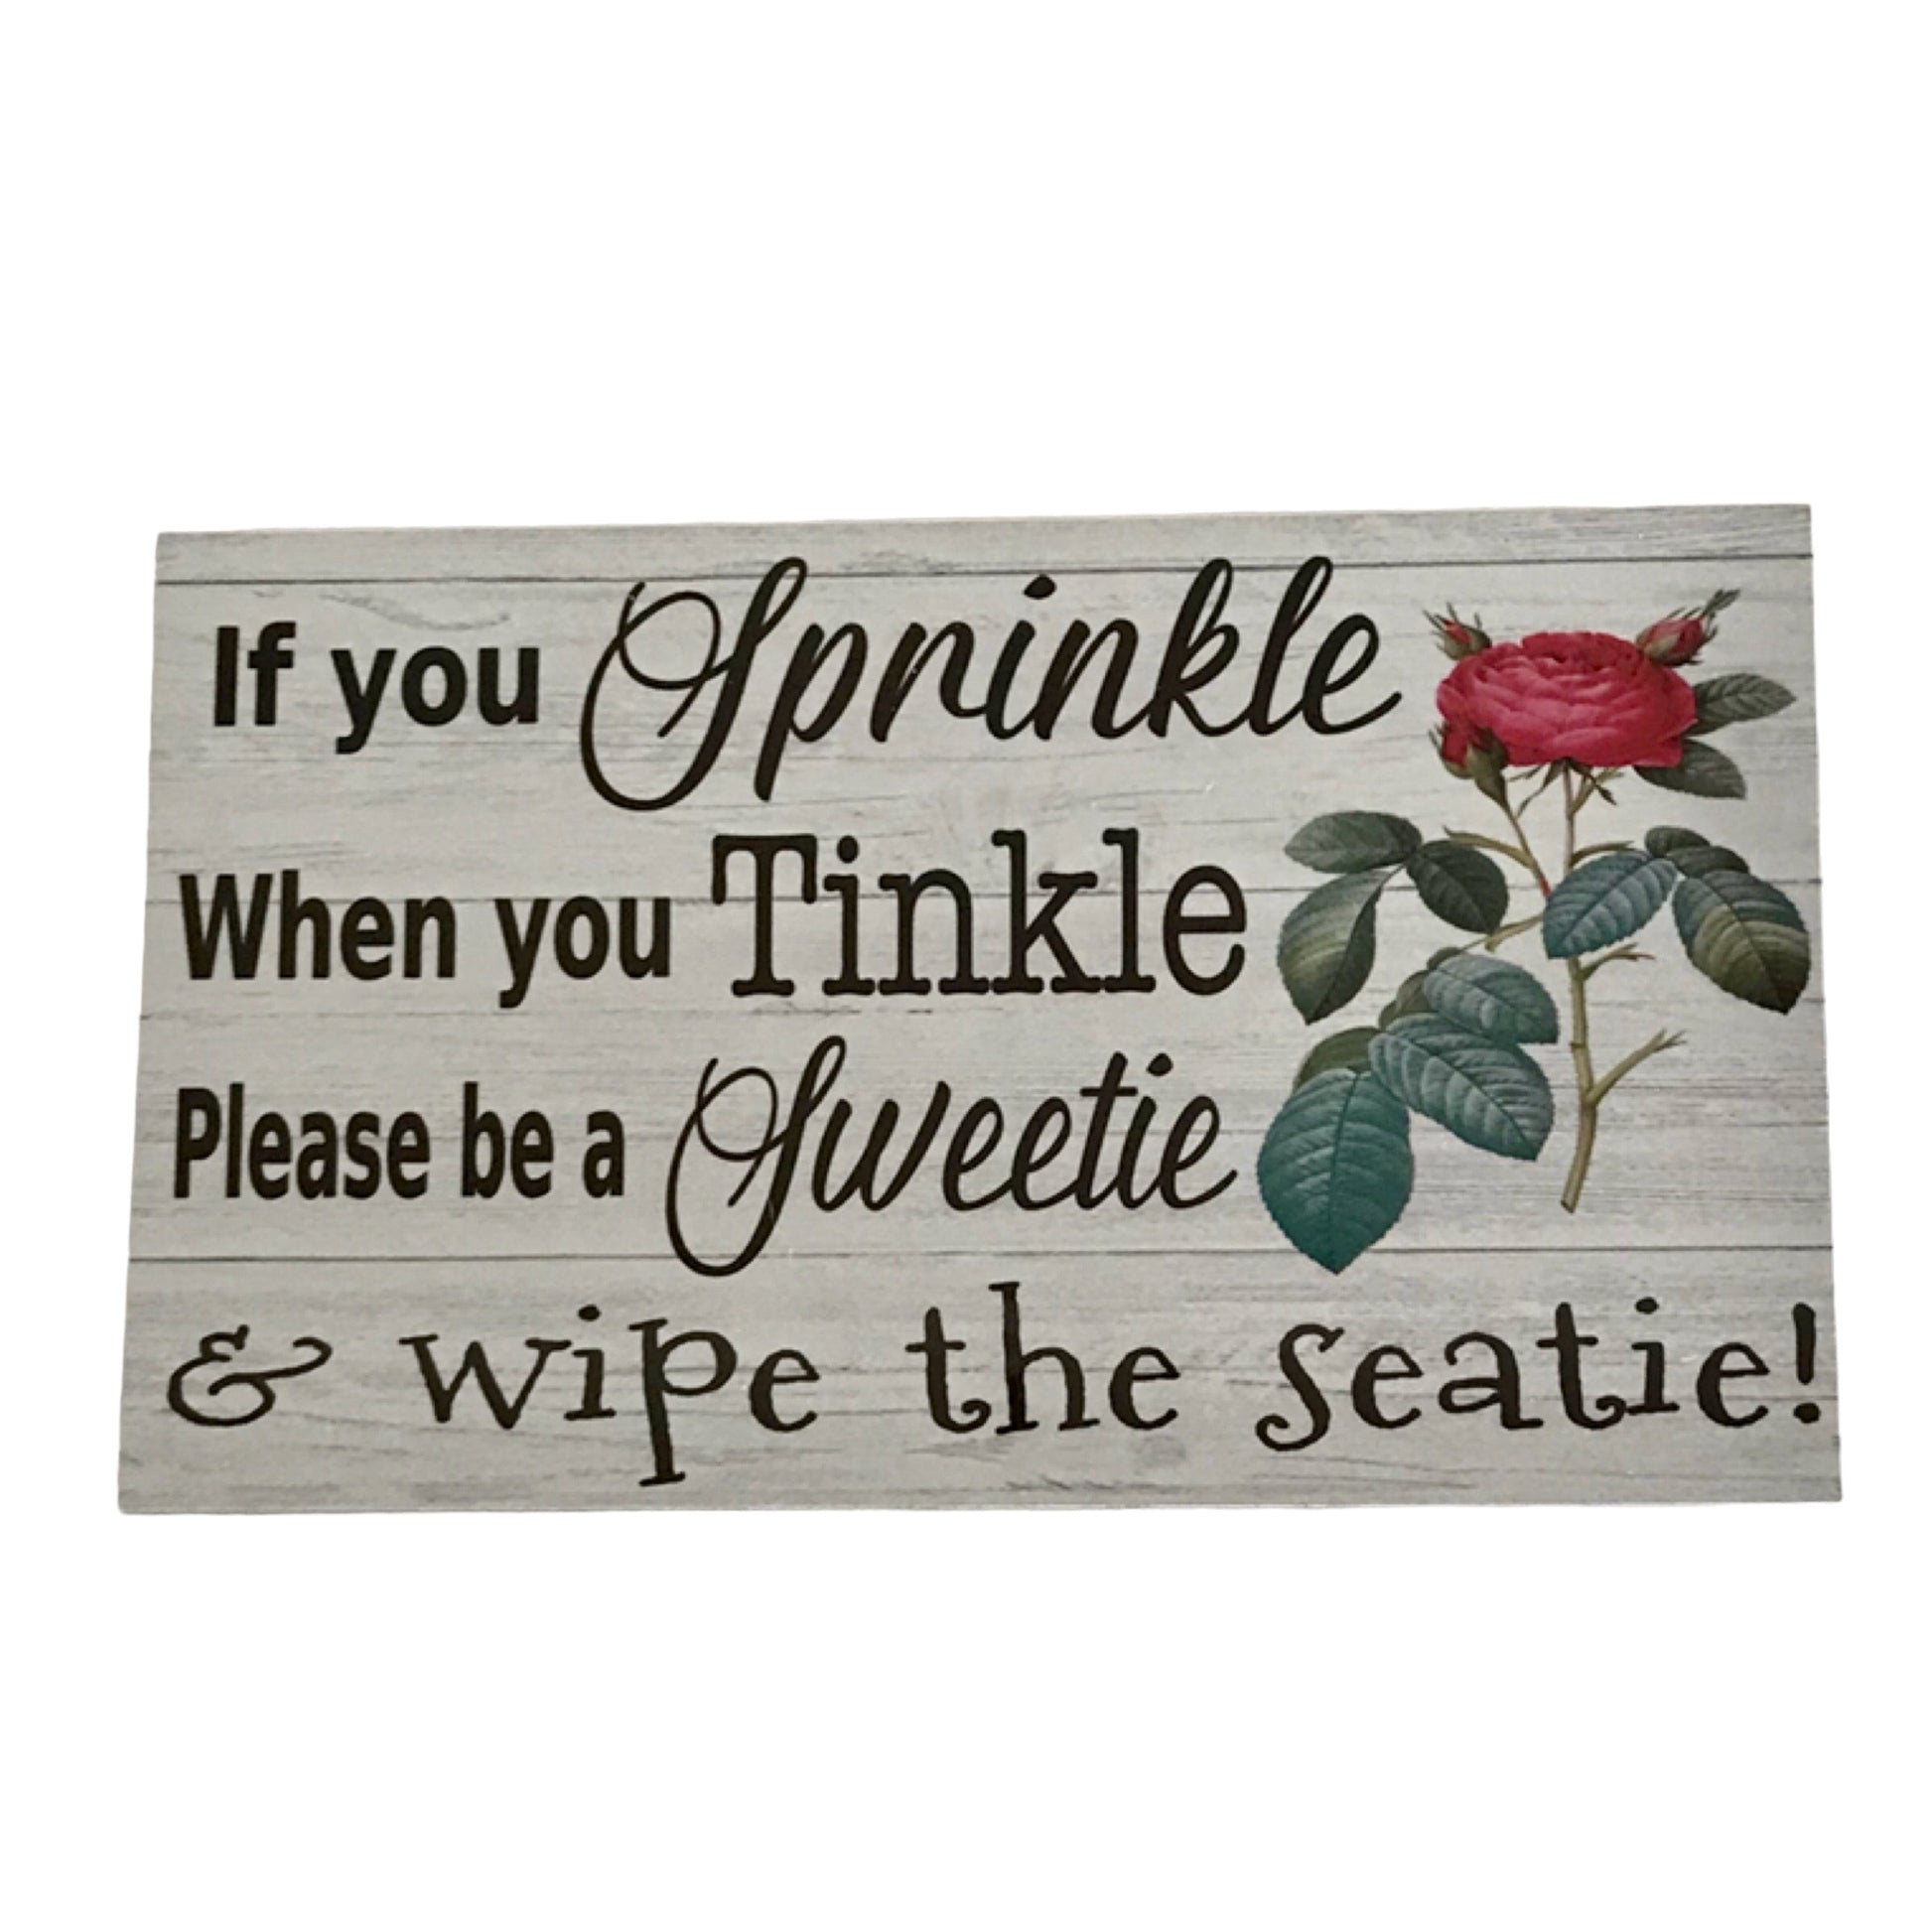 Toilet Sprinkle Tinkle Sweetie Rose Sign - The Renmy Store Homewares & Gifts 